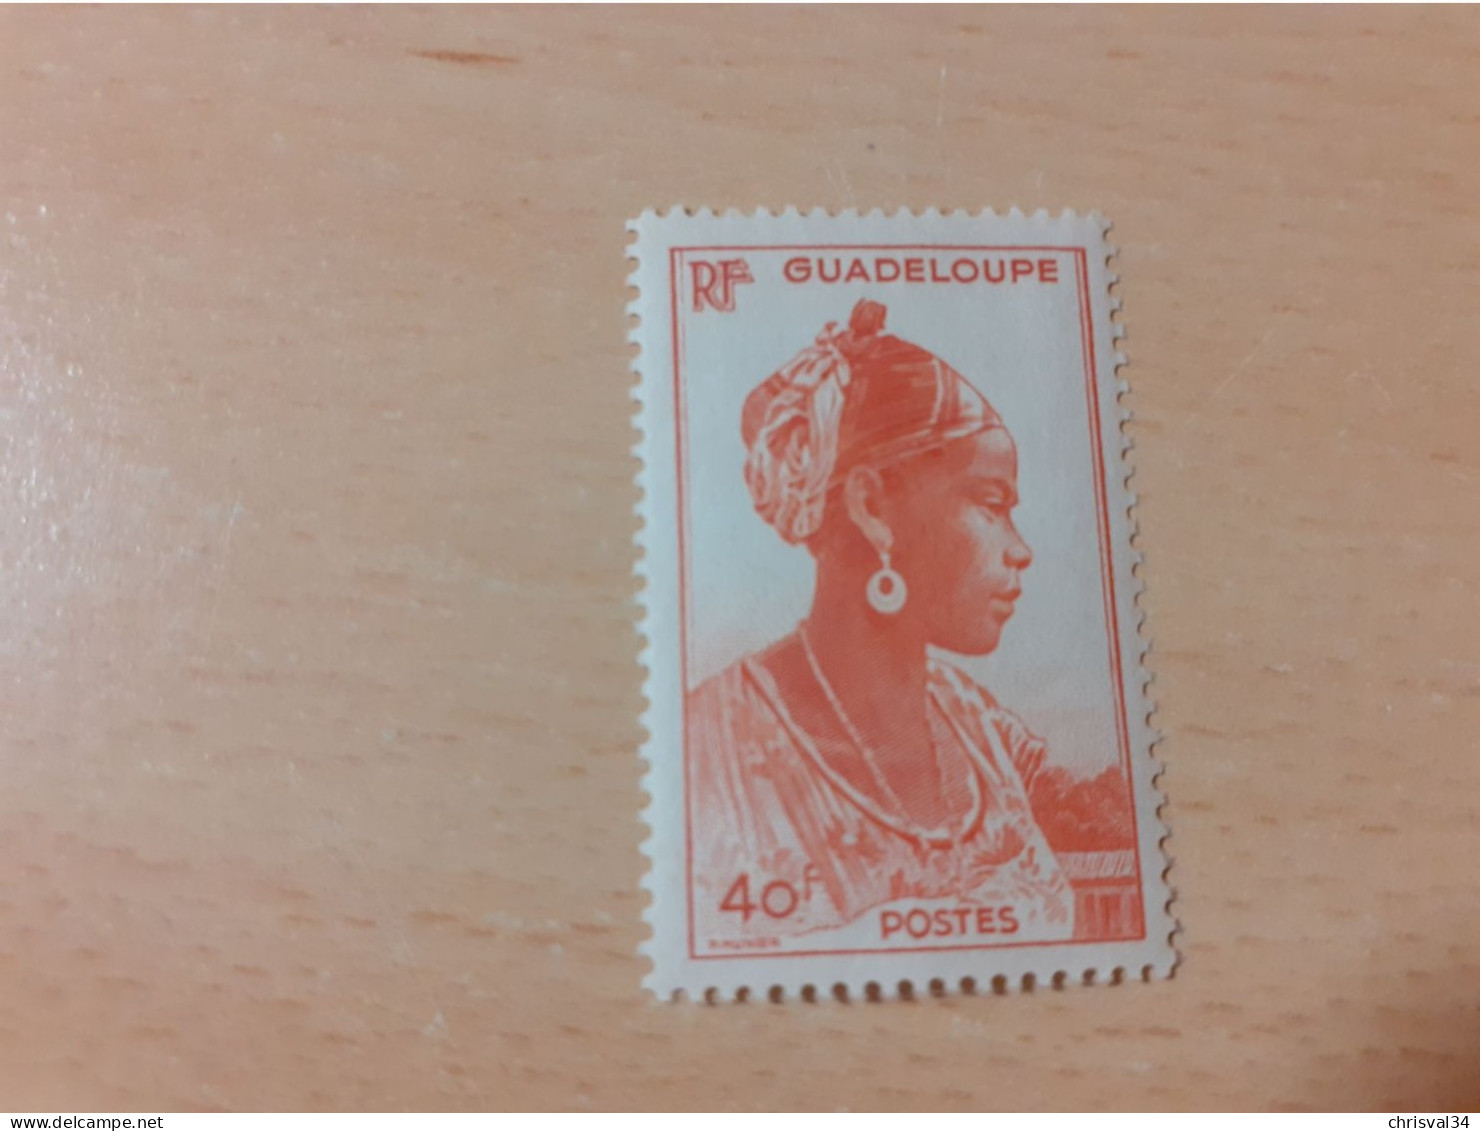 TIMBRE   GUADELOUPE       N  213    COTE  6,50   EUROS  NEUF  TRACE  CHARNIERE - Ungebraucht